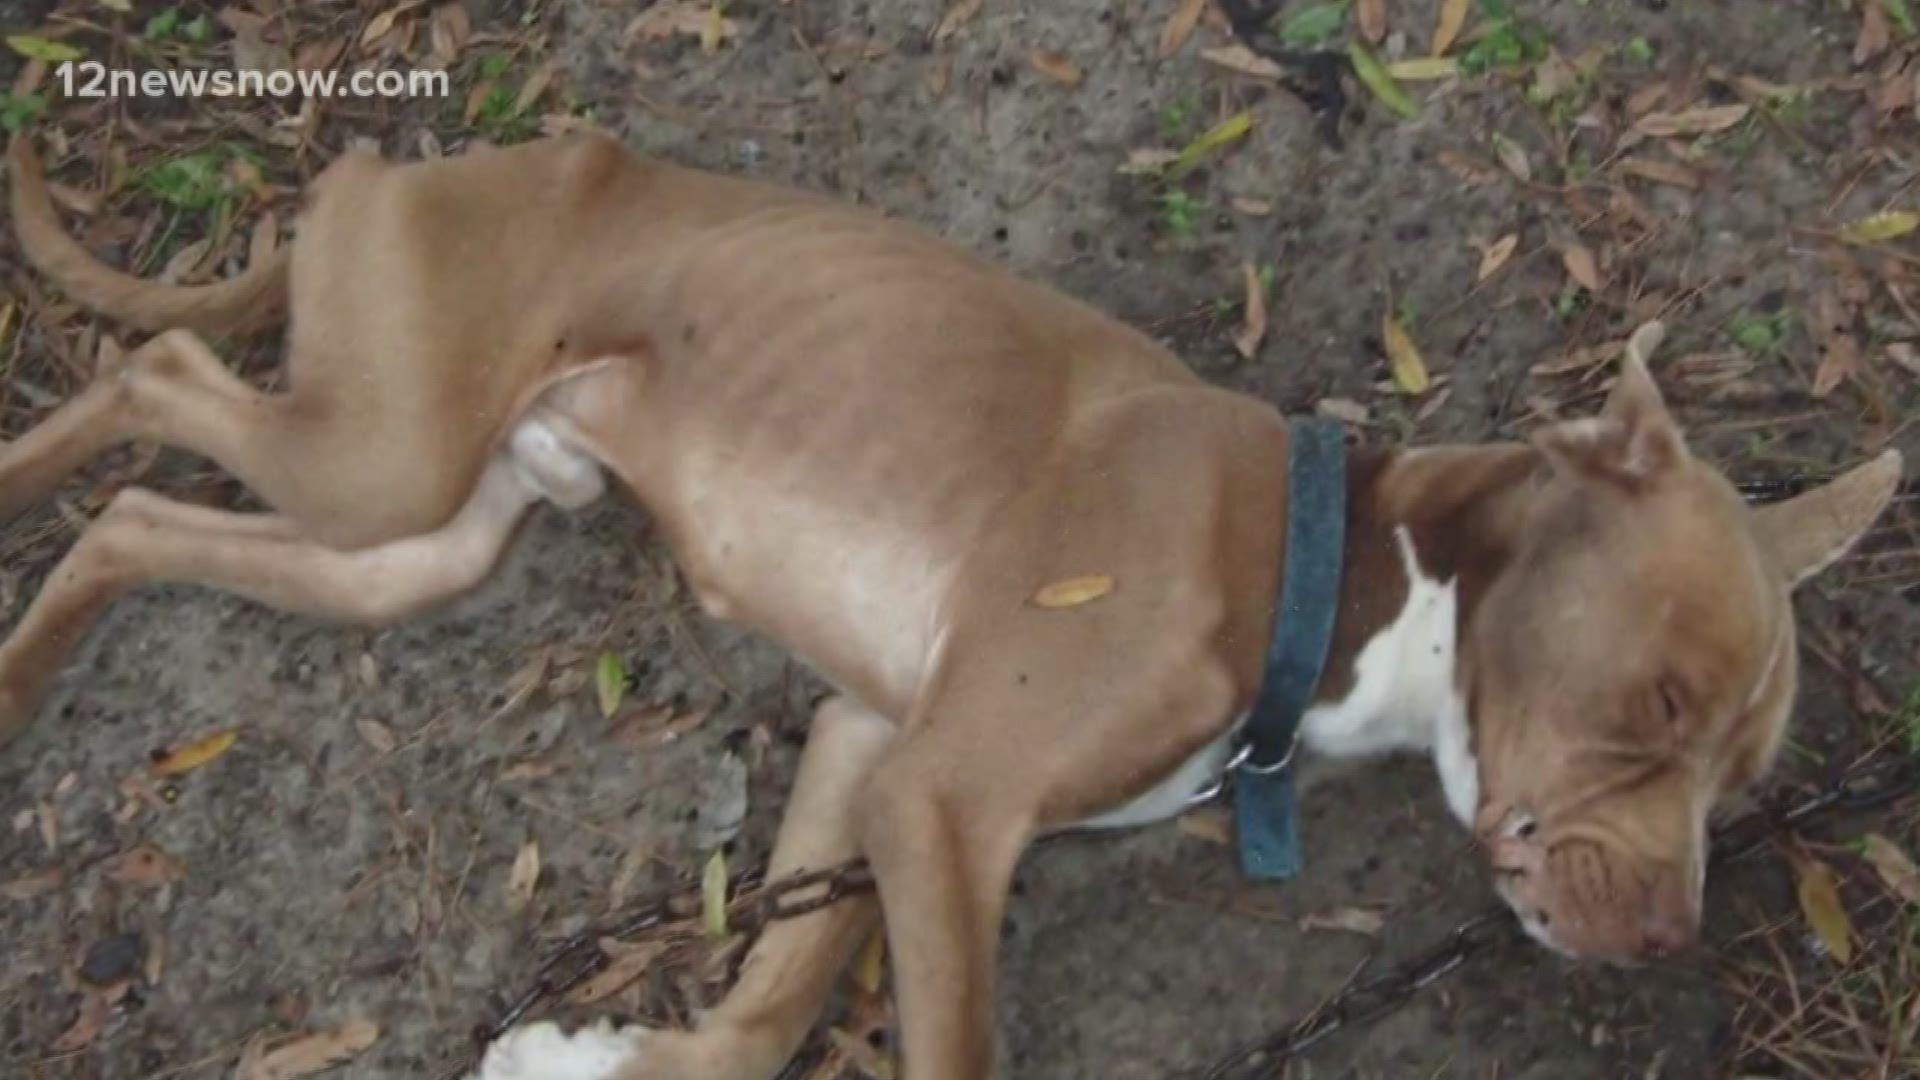 Beaumont woman fined, sentenced to 2 years probation for animal cruelty for neglecting dogs	